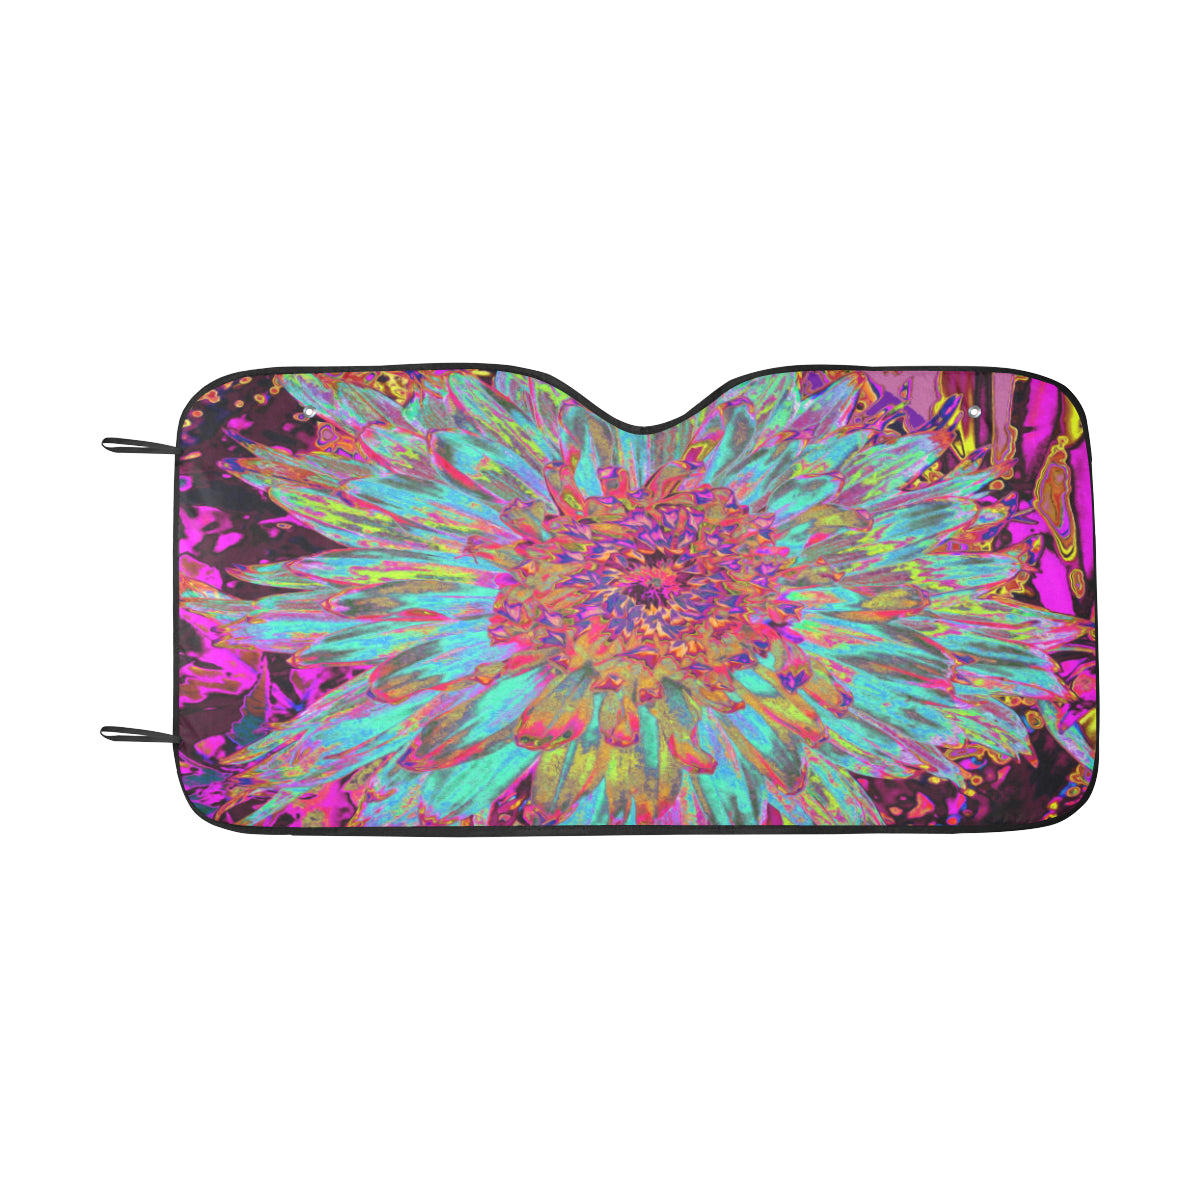 Auto Sun Shade, Psychedelic Teal Blue Abstract Decorative Dahlia